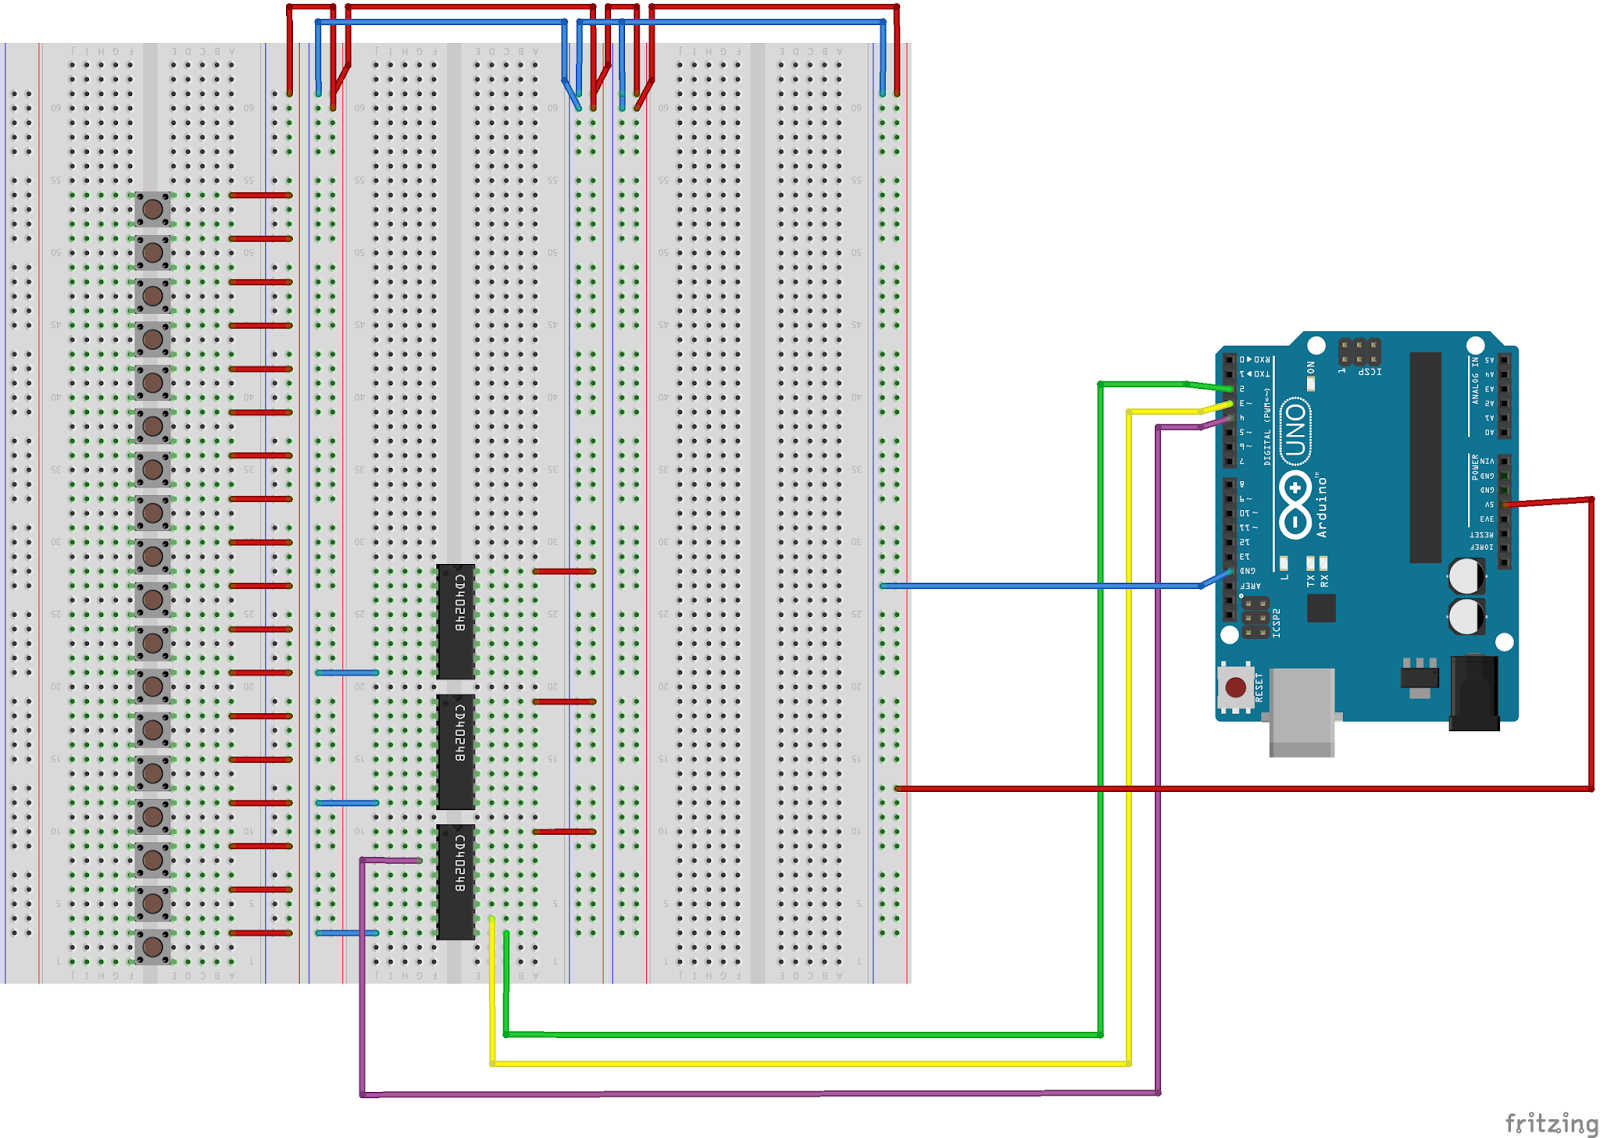 Dieter's Arduino Projects: Room Management System - Input Stage part 1